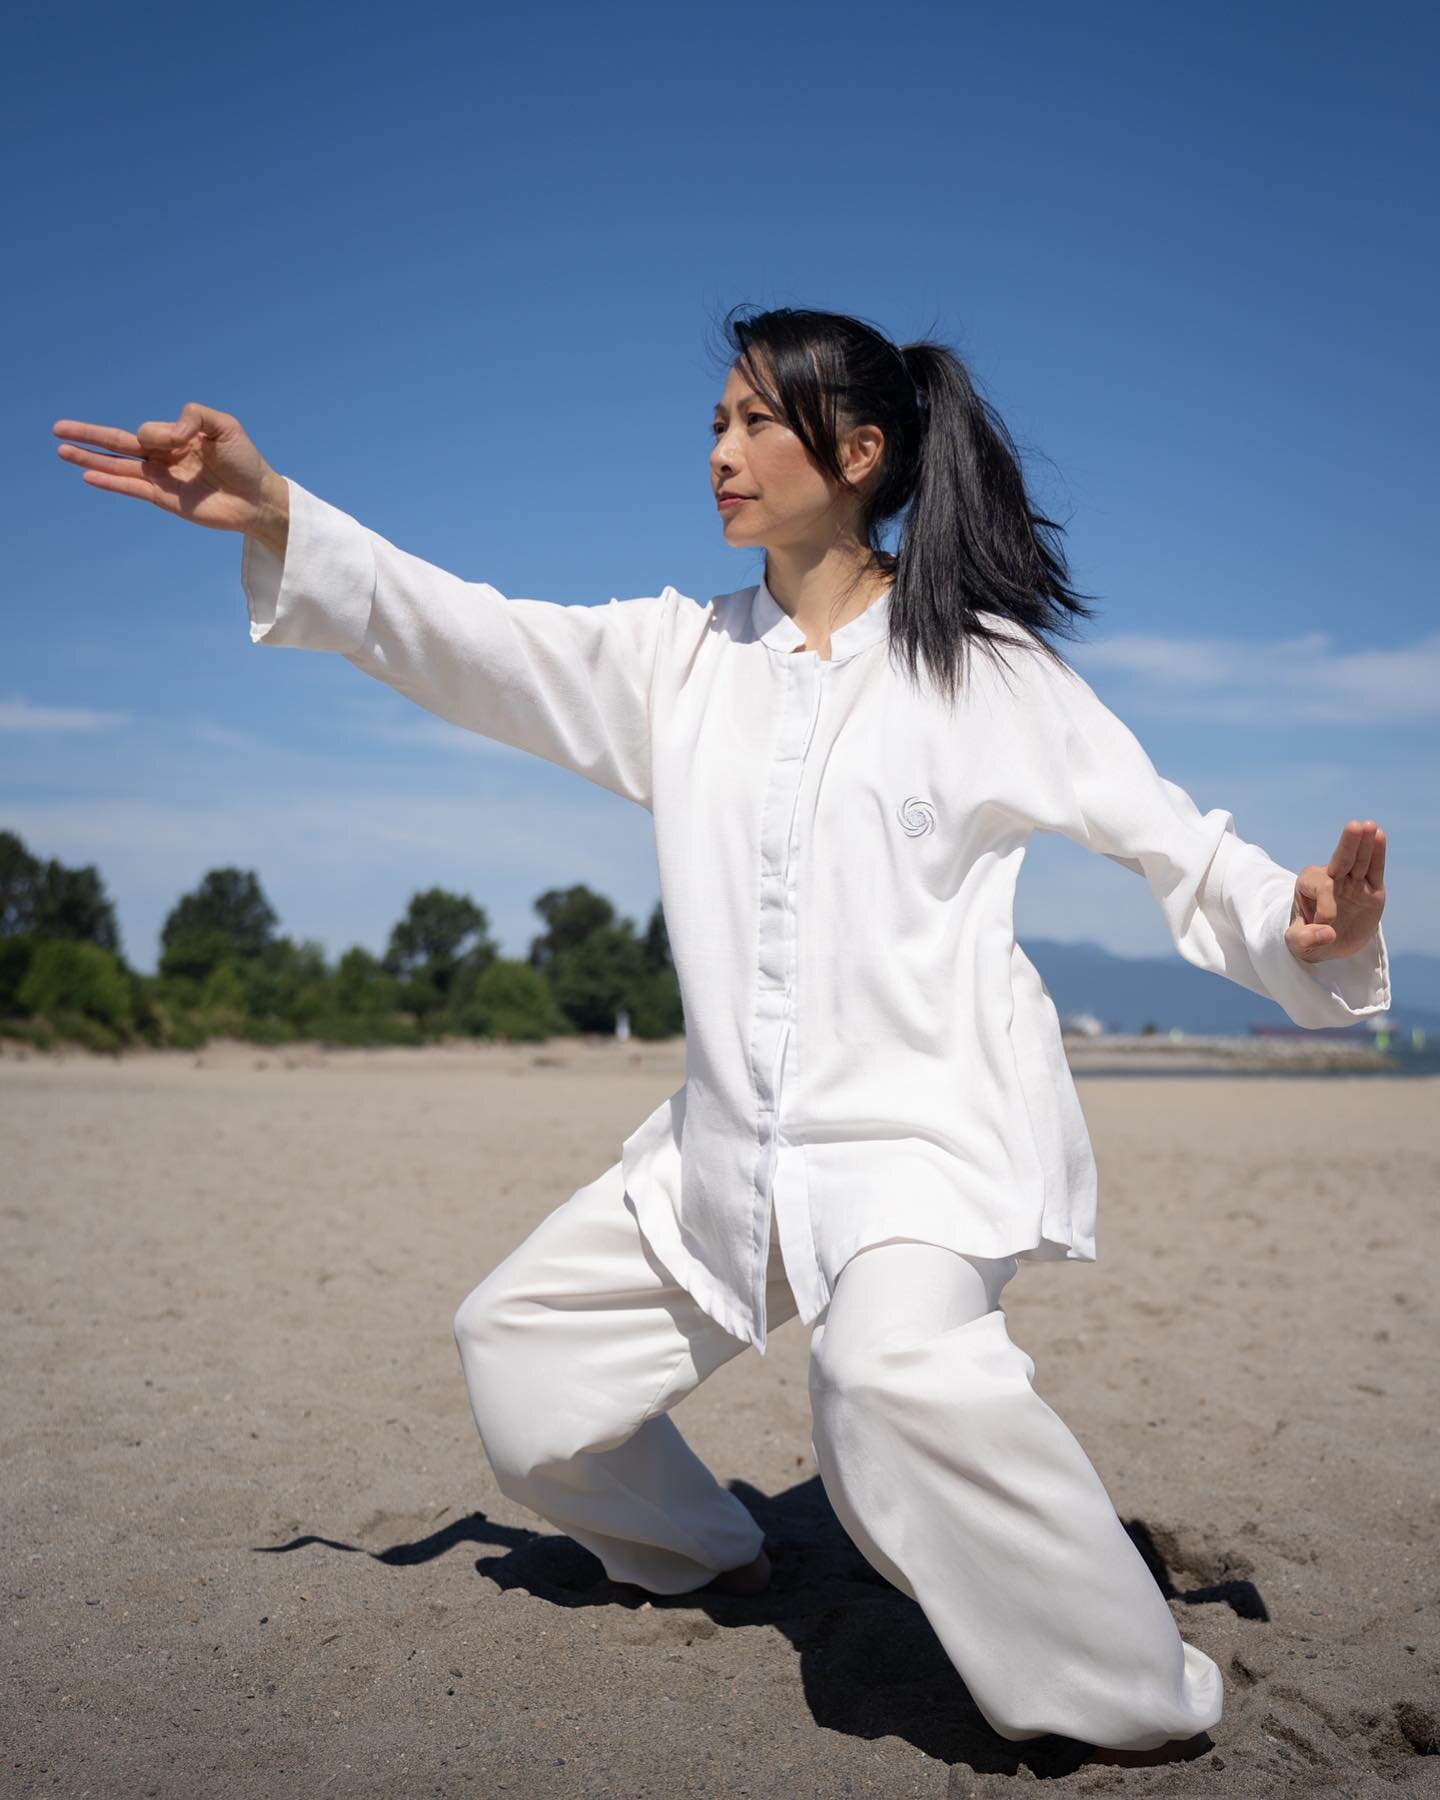 Summer Semester of Tai Chi begins this week! ☯️

✨ Build strength, balance, flexibility, and a peaceful state of mind in a positive, welcoming environment

✨ Wednesdays &amp; Fridays 
10:00am- 11:15am

✨Beginner-friendly classes take place at Creeksi